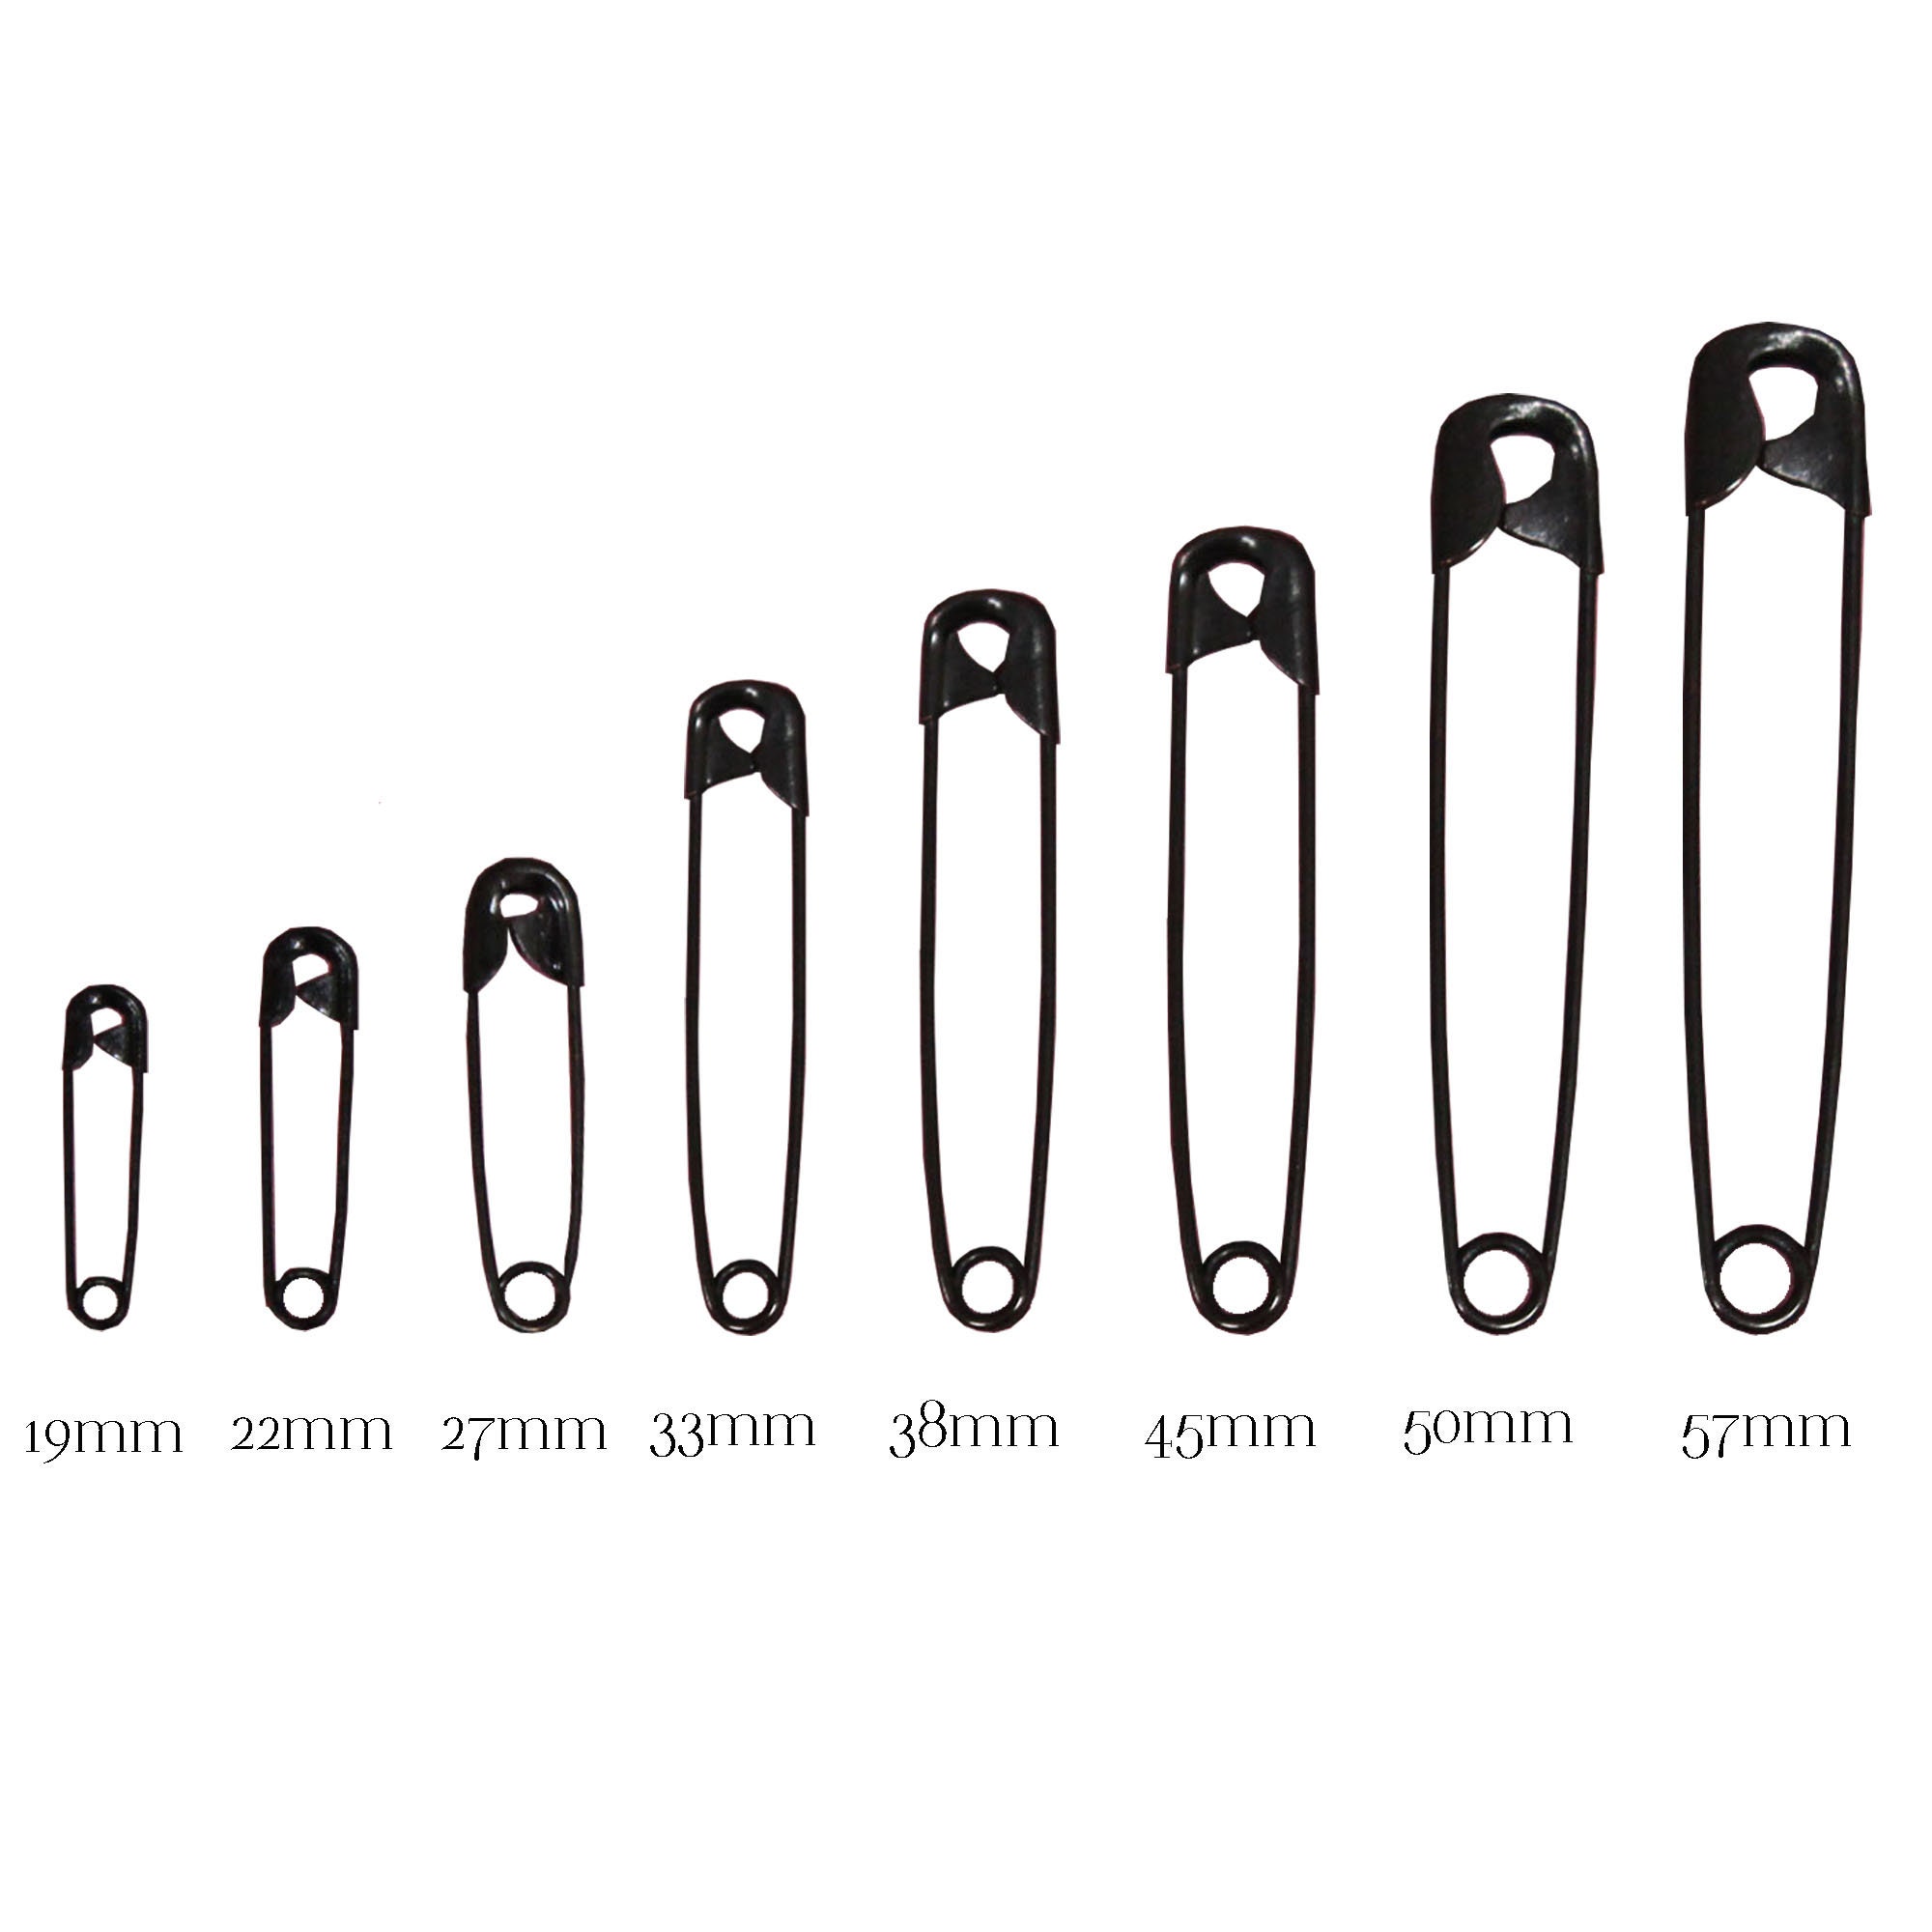 Premium Quality Black Safety Pins Made from Hardened Steel Pin Wire in 8  Sizes